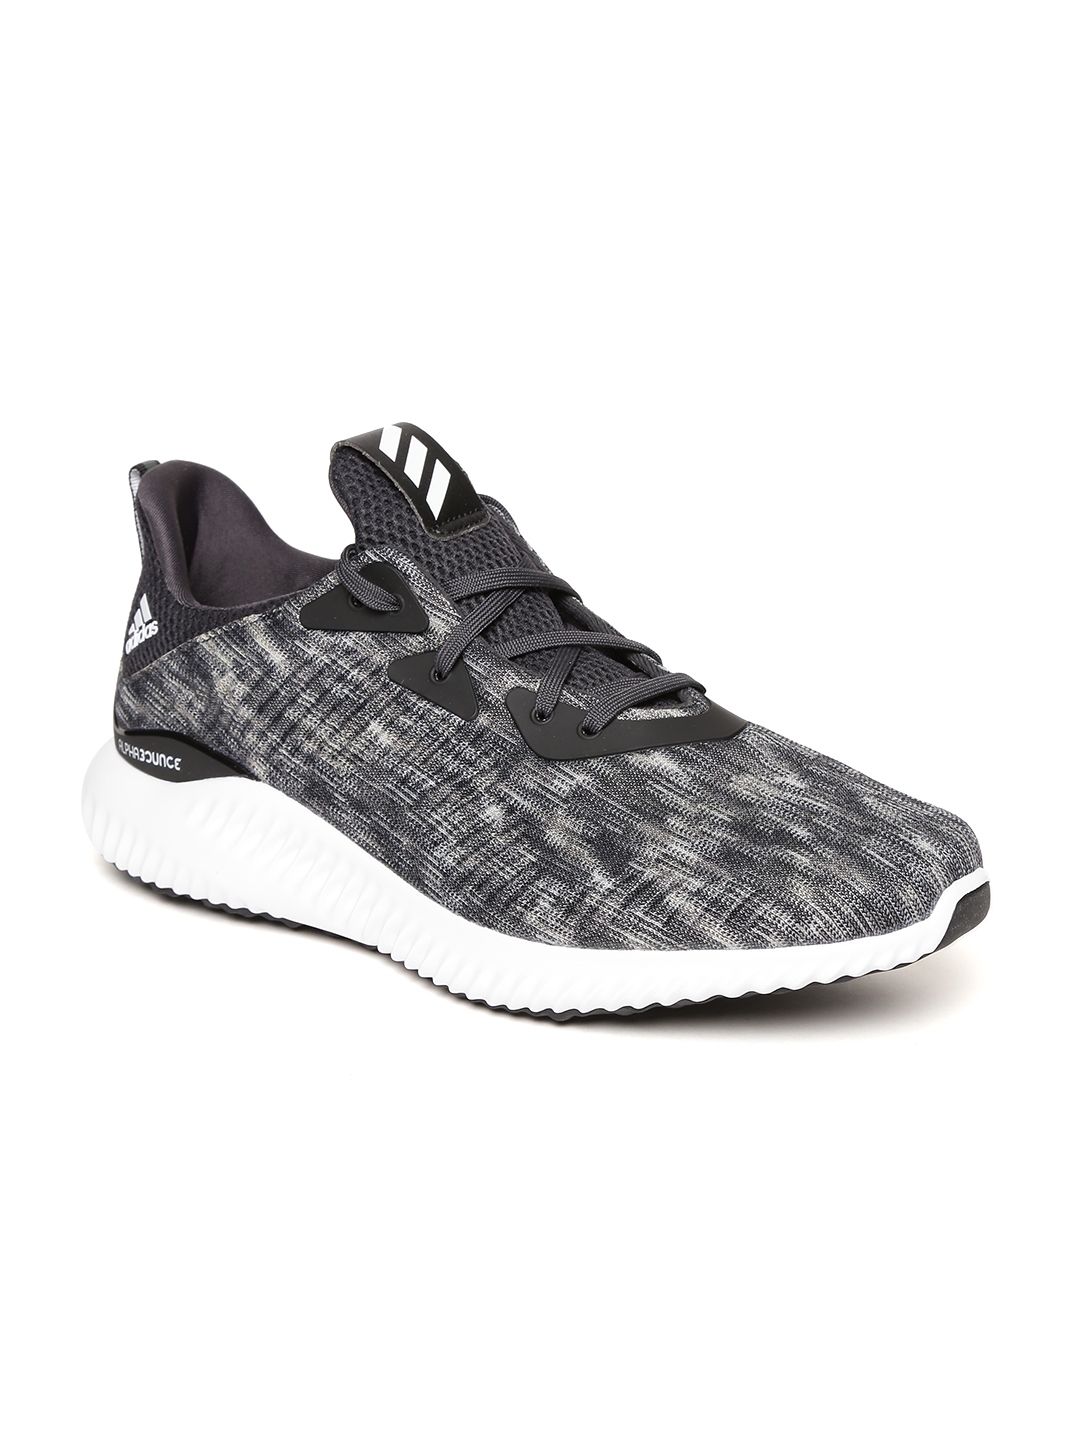 Buy ADIDAS Men Grey & Black Alphabounce SD Patterned Running Shoes ...